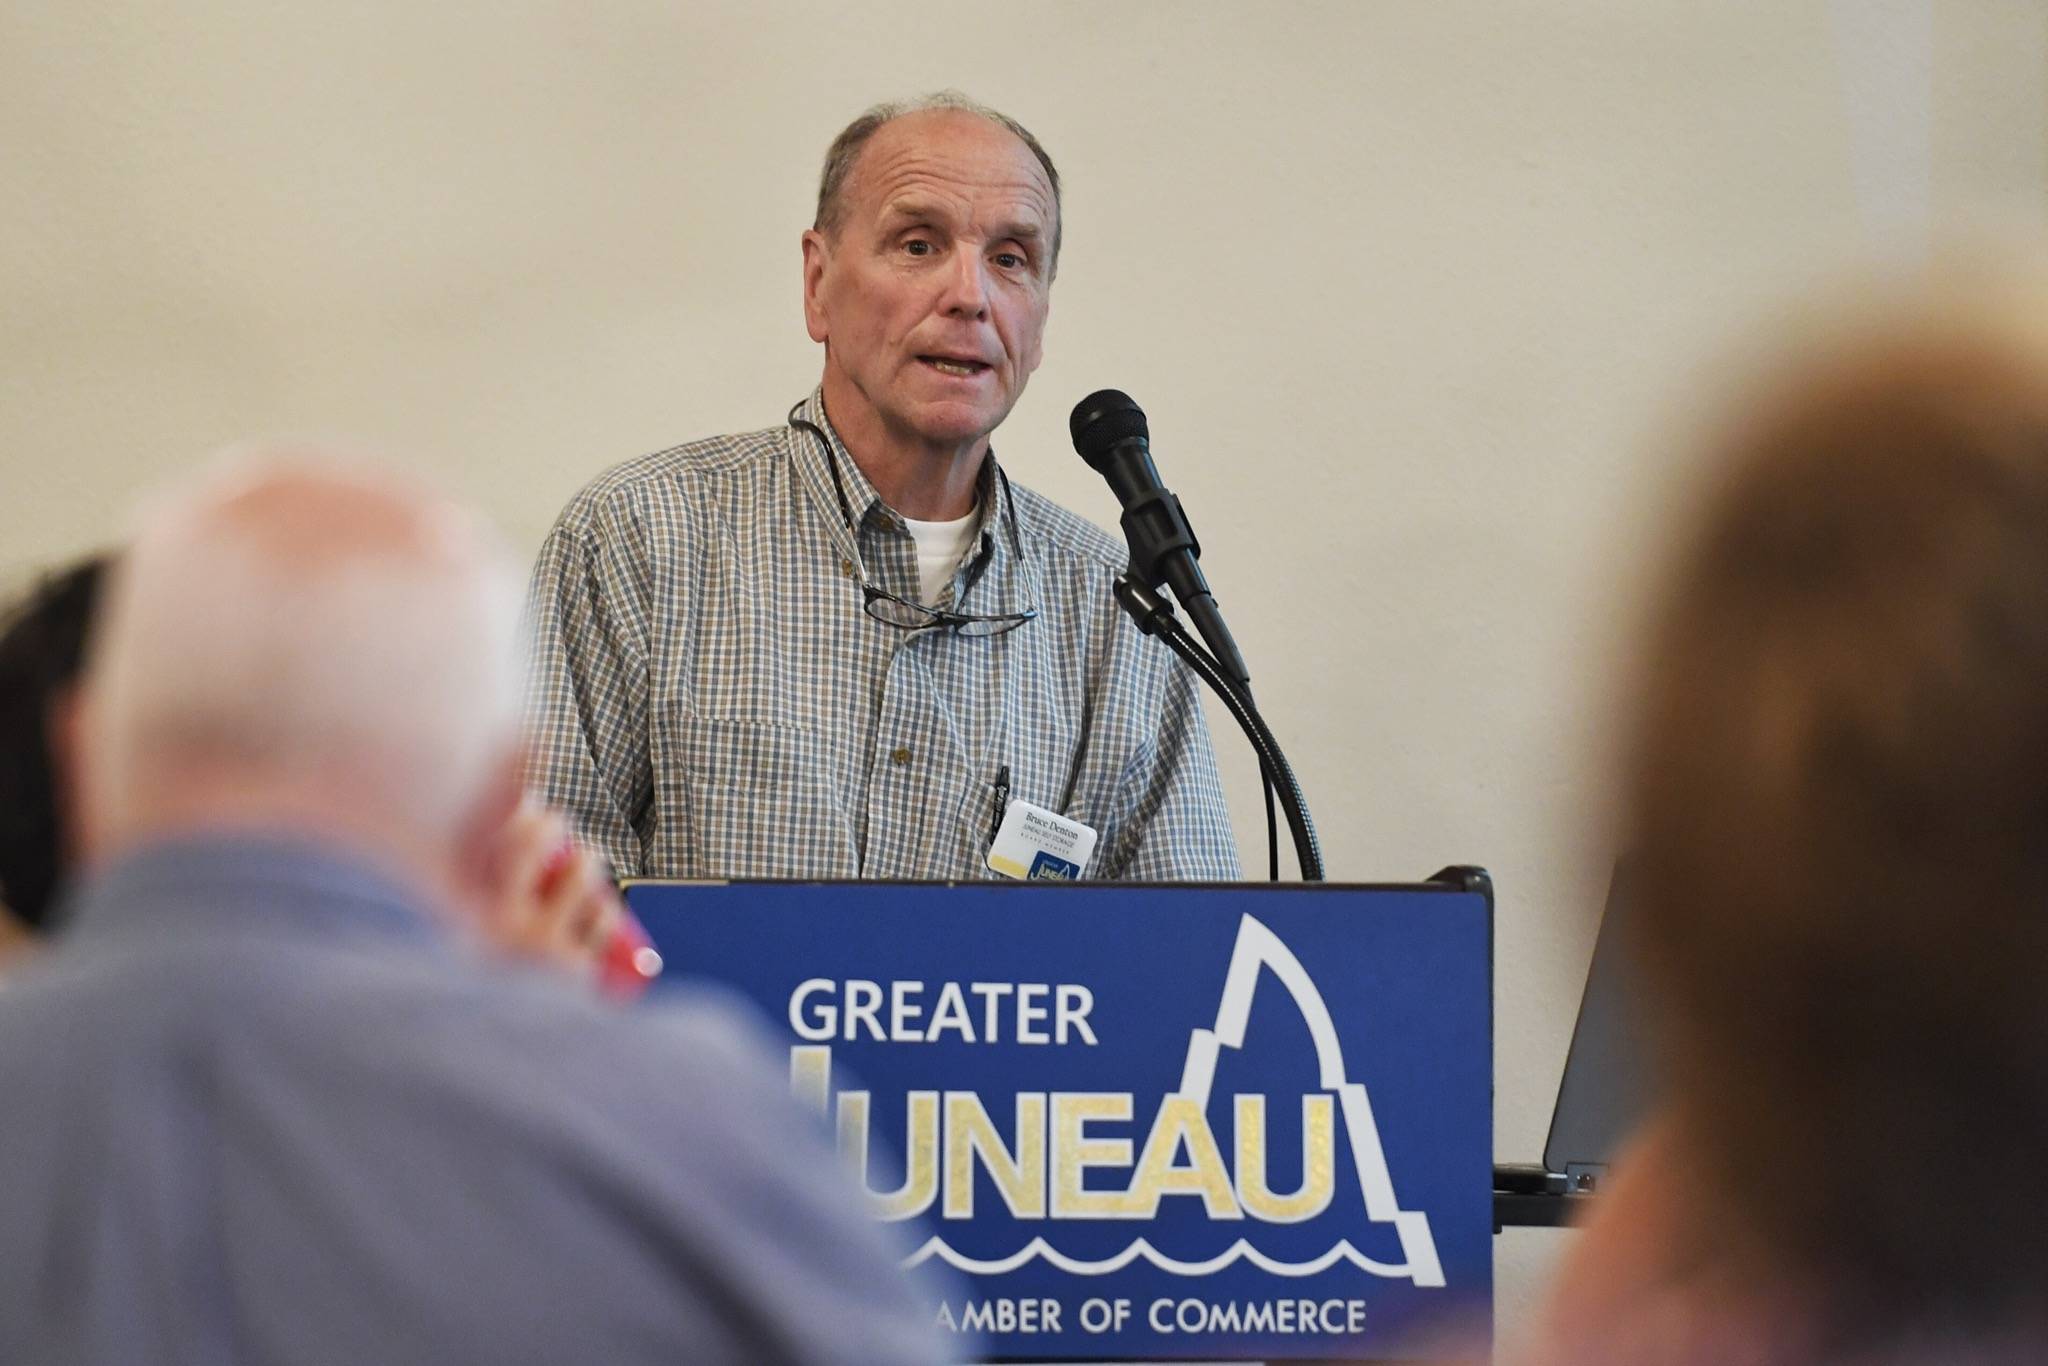 Bruce Denton speaks about the Housing First project during the Juneau Chamber of Commerce luncheon at the Moose Lodge on Thursday, Aug. 8, 2019. (Michael Penn | Juneau Empire)